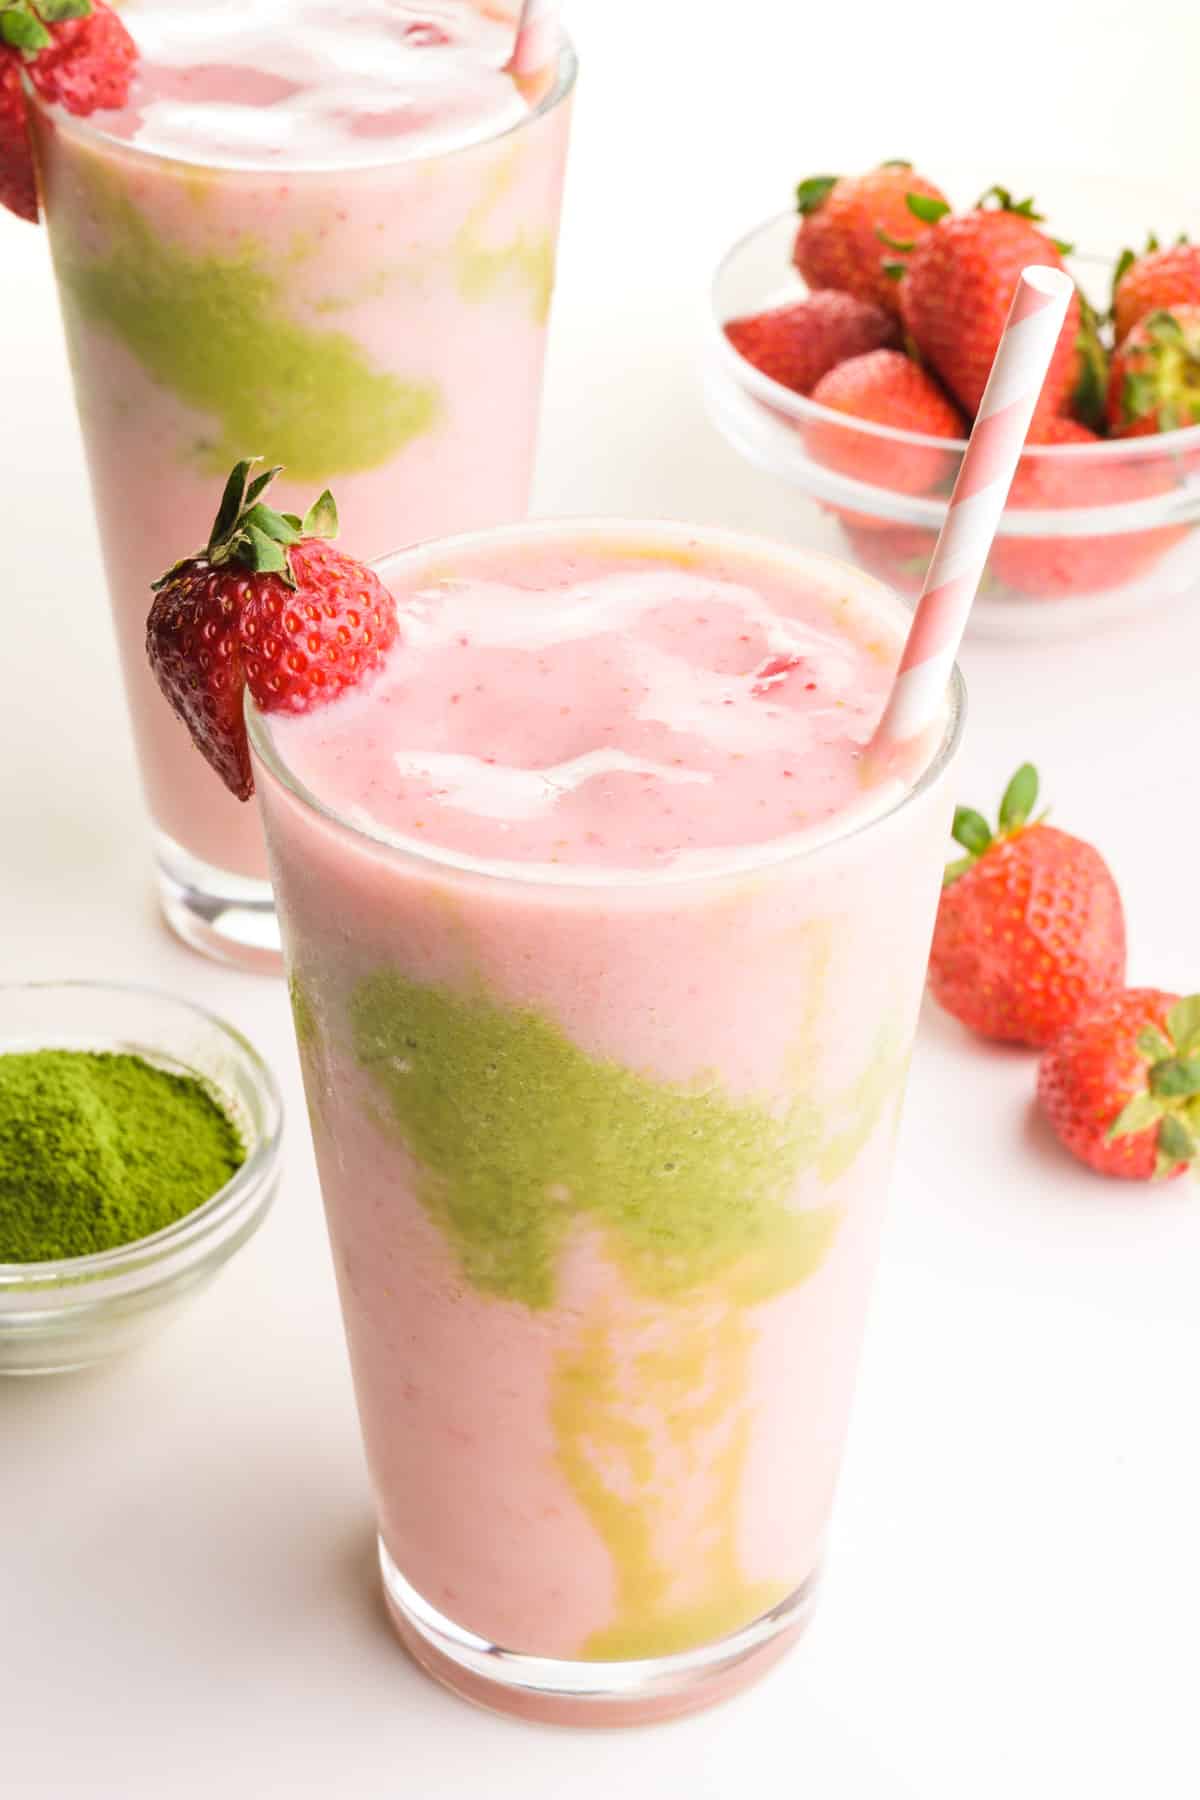 Pink and green smoothie liquid in two glasses, one in front of the other.  There is a bowl of green tea powder and strawberries around the glasses.